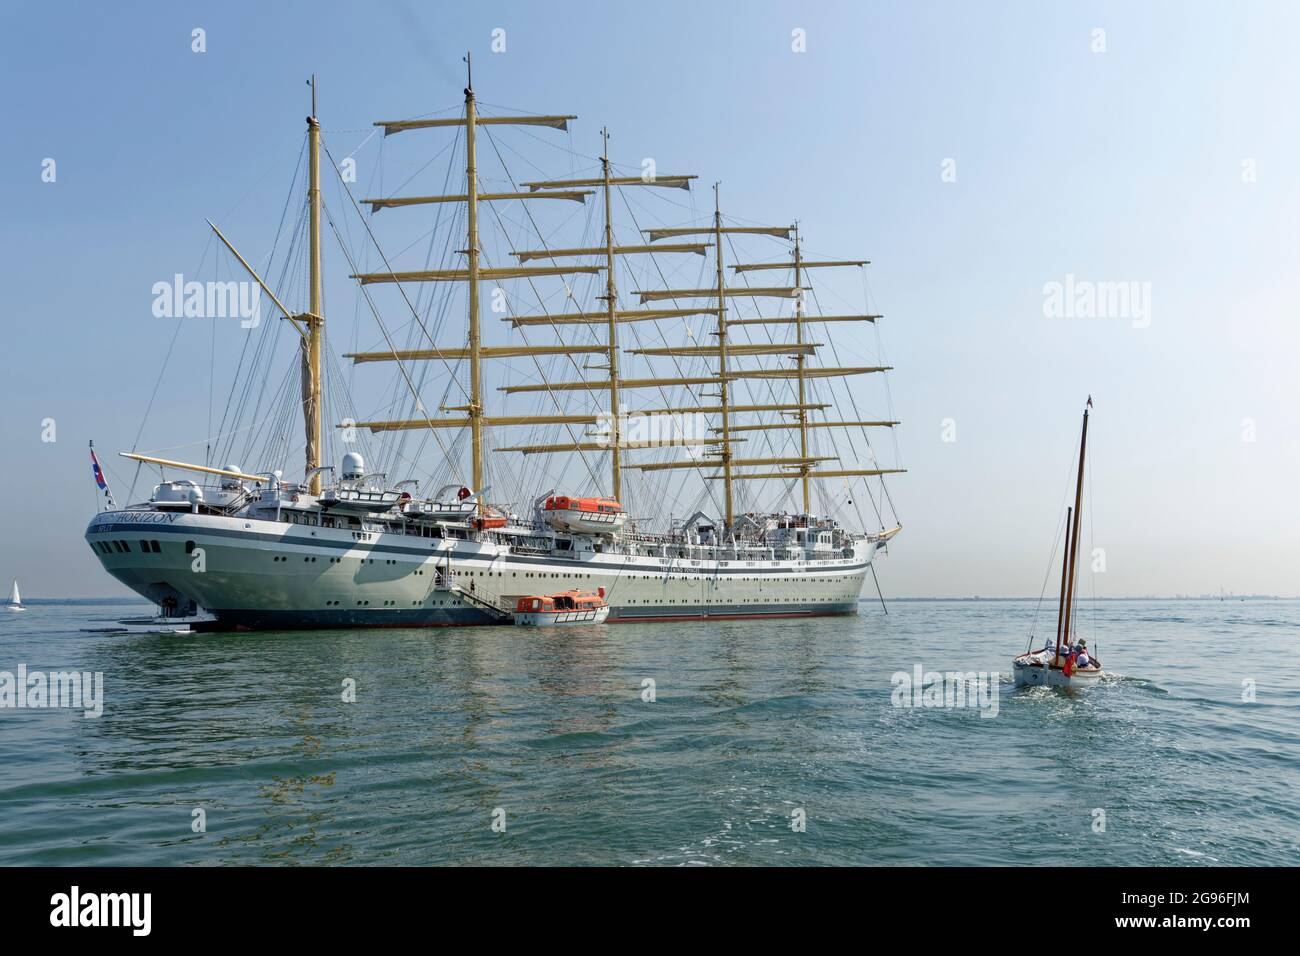 A classic design. The Golden Horizon has a steel hull, five masts and is based on a French design. She is the world's largest luxury sailing ship. Stock Photo